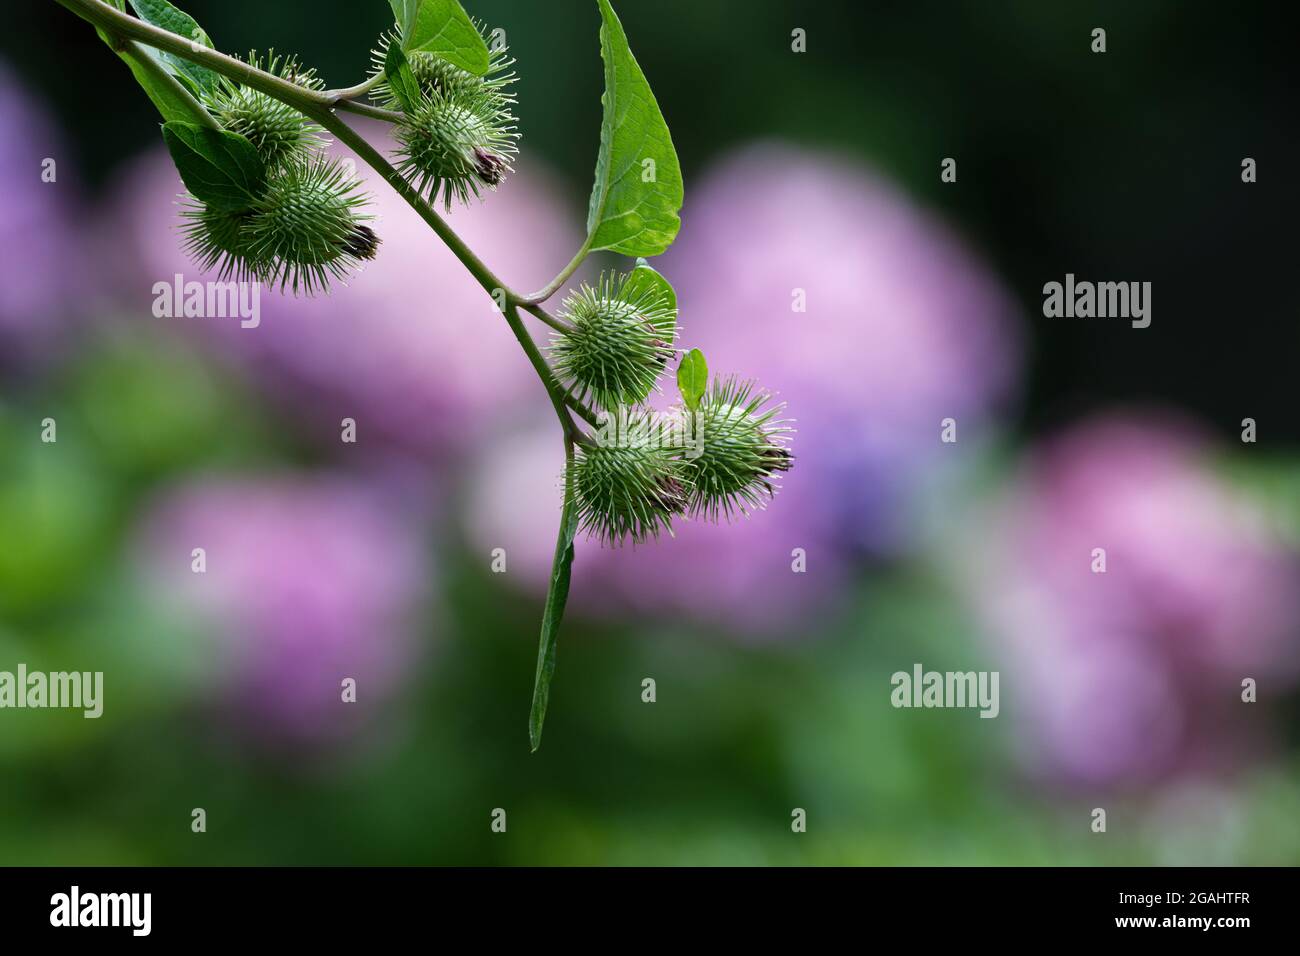 Articum lappa, Inflorescence of Greater burdock against blurred green and pink background Stock Photo